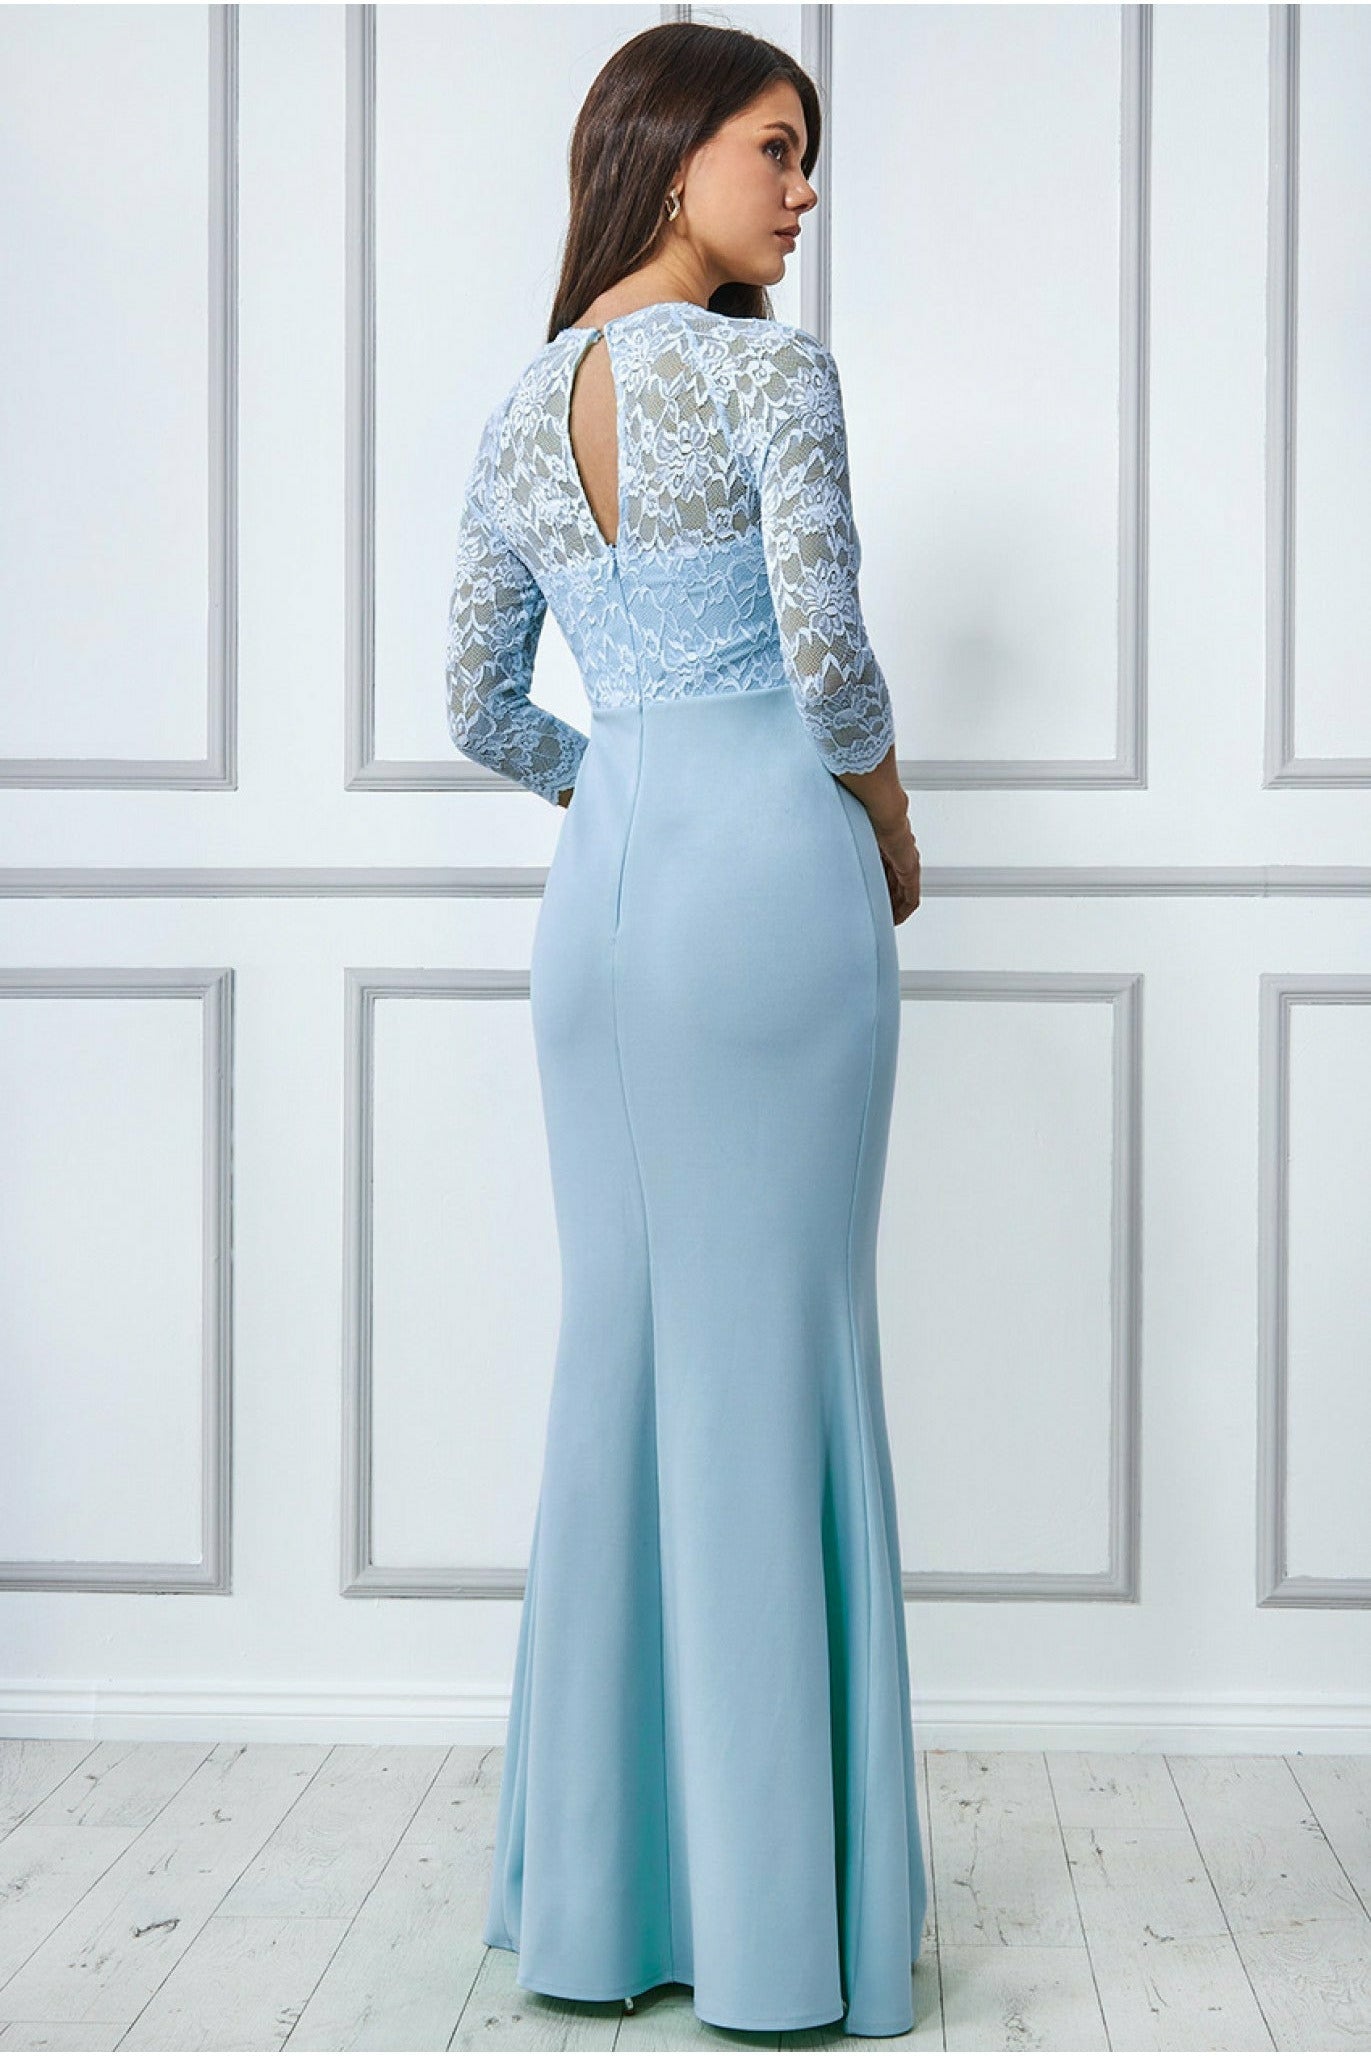 Lace Bodice Maxi Dress With Sleeves - Powder Blue DR1551